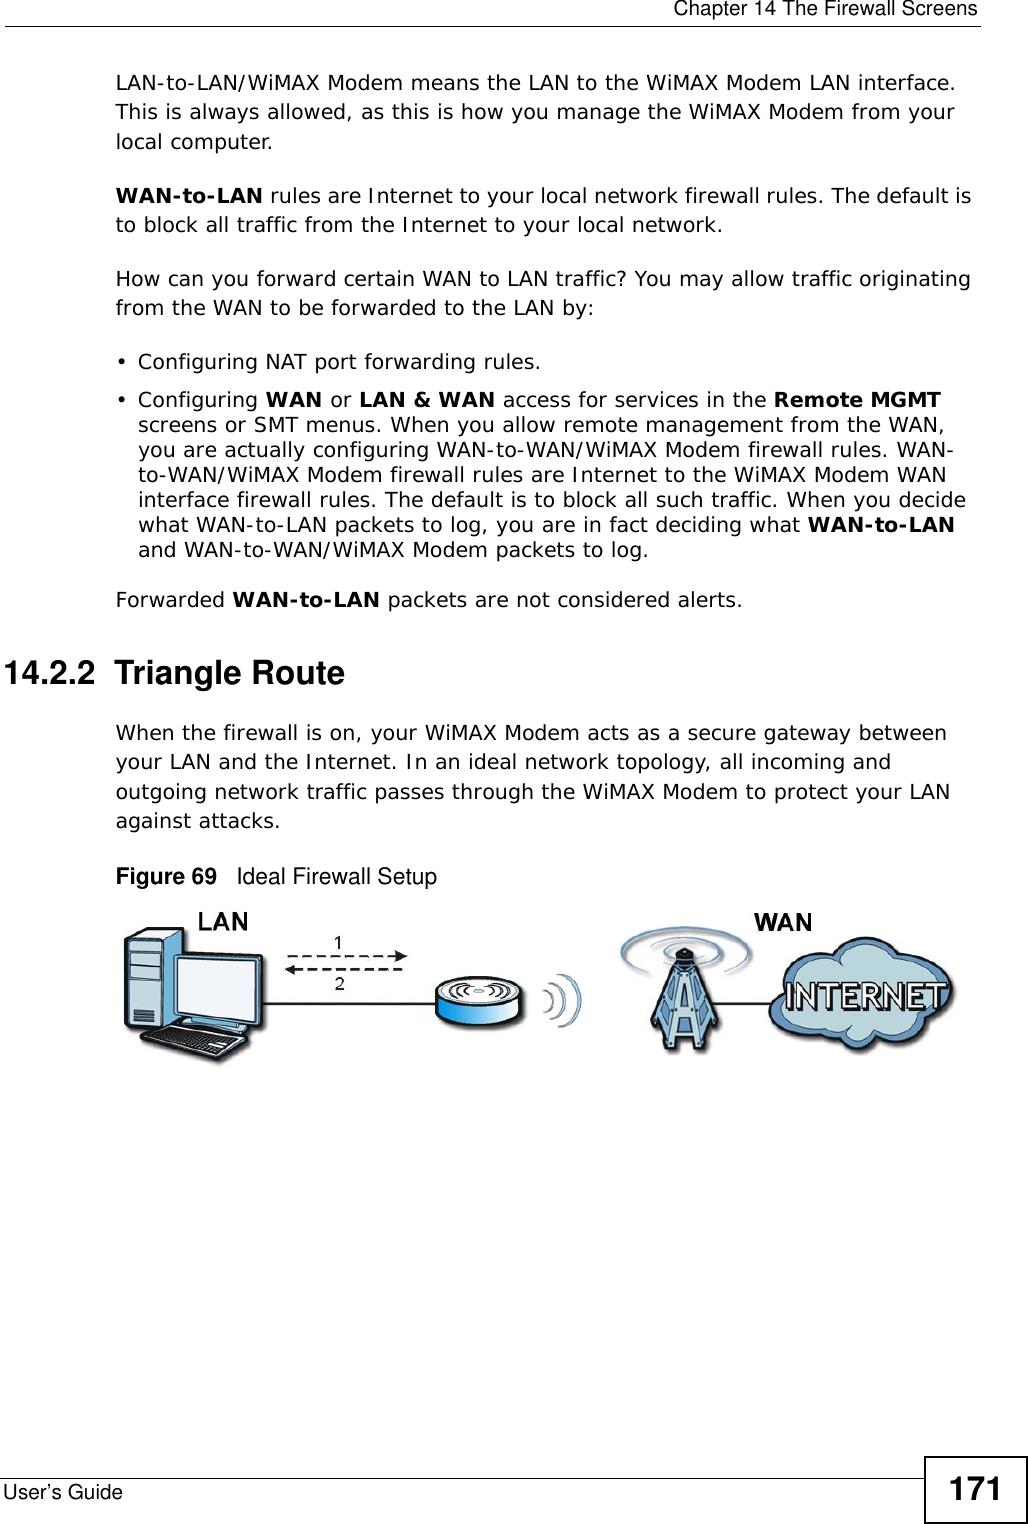  Chapter 14 The Firewall ScreensUser’s Guide 171LAN-to-LAN/WiMAX Modem means the LAN to the WiMAX Modem LAN interface. This is always allowed, as this is how you manage the WiMAX Modem from your local computer.WAN-to-LAN rules are Internet to your local network firewall rules. The default is to block all traffic from the Internet to your local network. How can you forward certain WAN to LAN traffic? You may allow traffic originating from the WAN to be forwarded to the LAN by:• Configuring NAT port forwarding rules.•Configuring WAN or LAN &amp; WAN access for services in the Remote MGMT screens or SMT menus. When you allow remote management from the WAN, you are actually configuring WAN-to-WAN/WiMAX Modem firewall rules. WAN-to-WAN/WiMAX Modem firewall rules are Internet to the WiMAX Modem WAN interface firewall rules. The default is to block all such traffic. When you decide what WAN-to-LAN packets to log, you are in fact deciding what WAN-to-LAN and WAN-to-WAN/WiMAX Modem packets to log. Forwarded WAN-to-LAN packets are not considered alerts.14.2.2  Triangle RouteWhen the firewall is on, your WiMAX Modem acts as a secure gateway between your LAN and the Internet. In an ideal network topology, all incoming and outgoing network traffic passes through the WiMAX Modem to protect your LAN against attacks.Figure 69   Ideal Firewall Setup